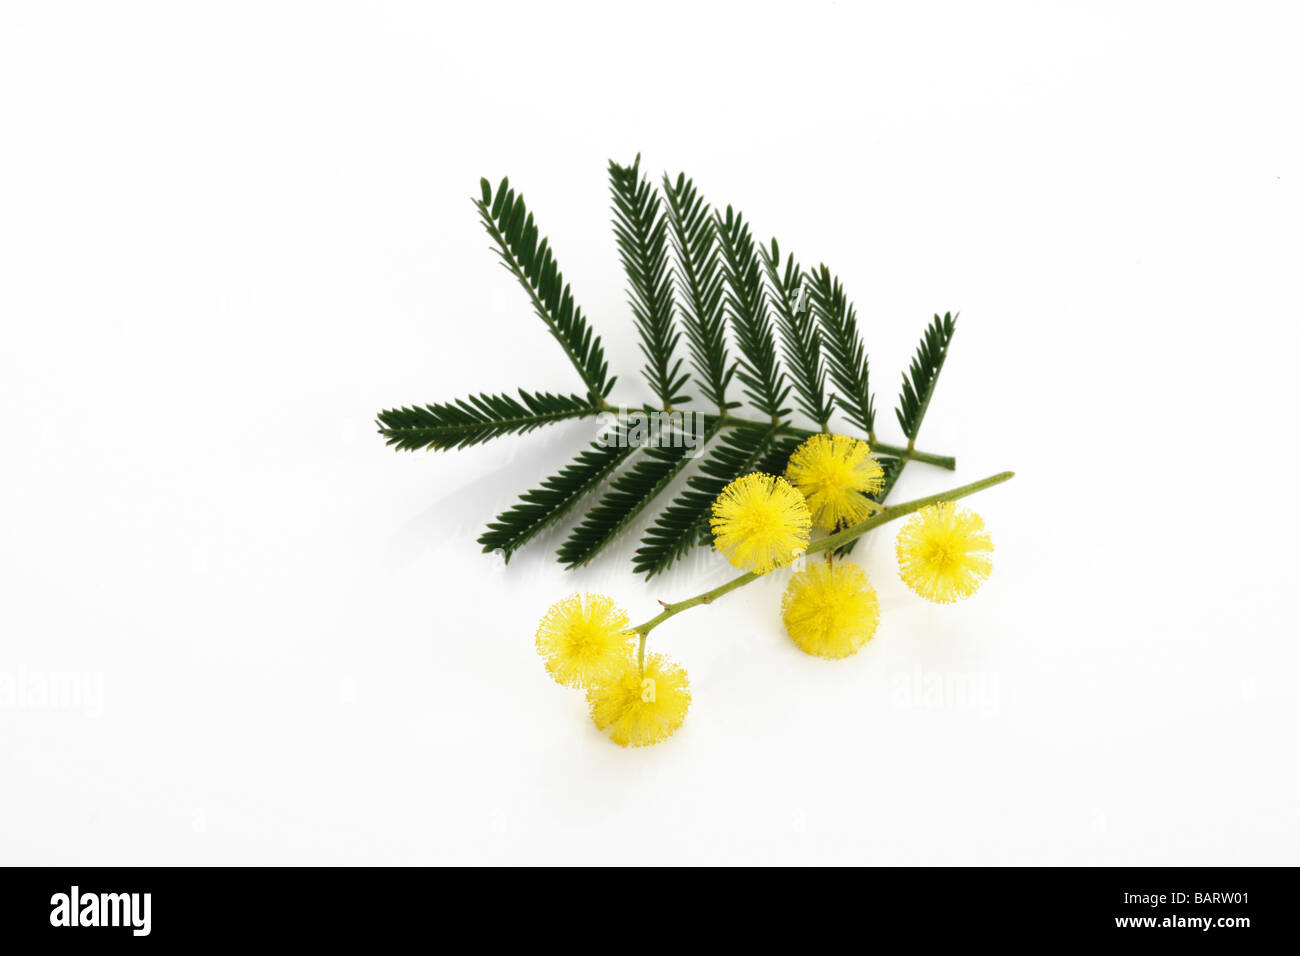 Mimosa Bunch ((Mimosa Gaulois Astier), elevated view Stock Photo